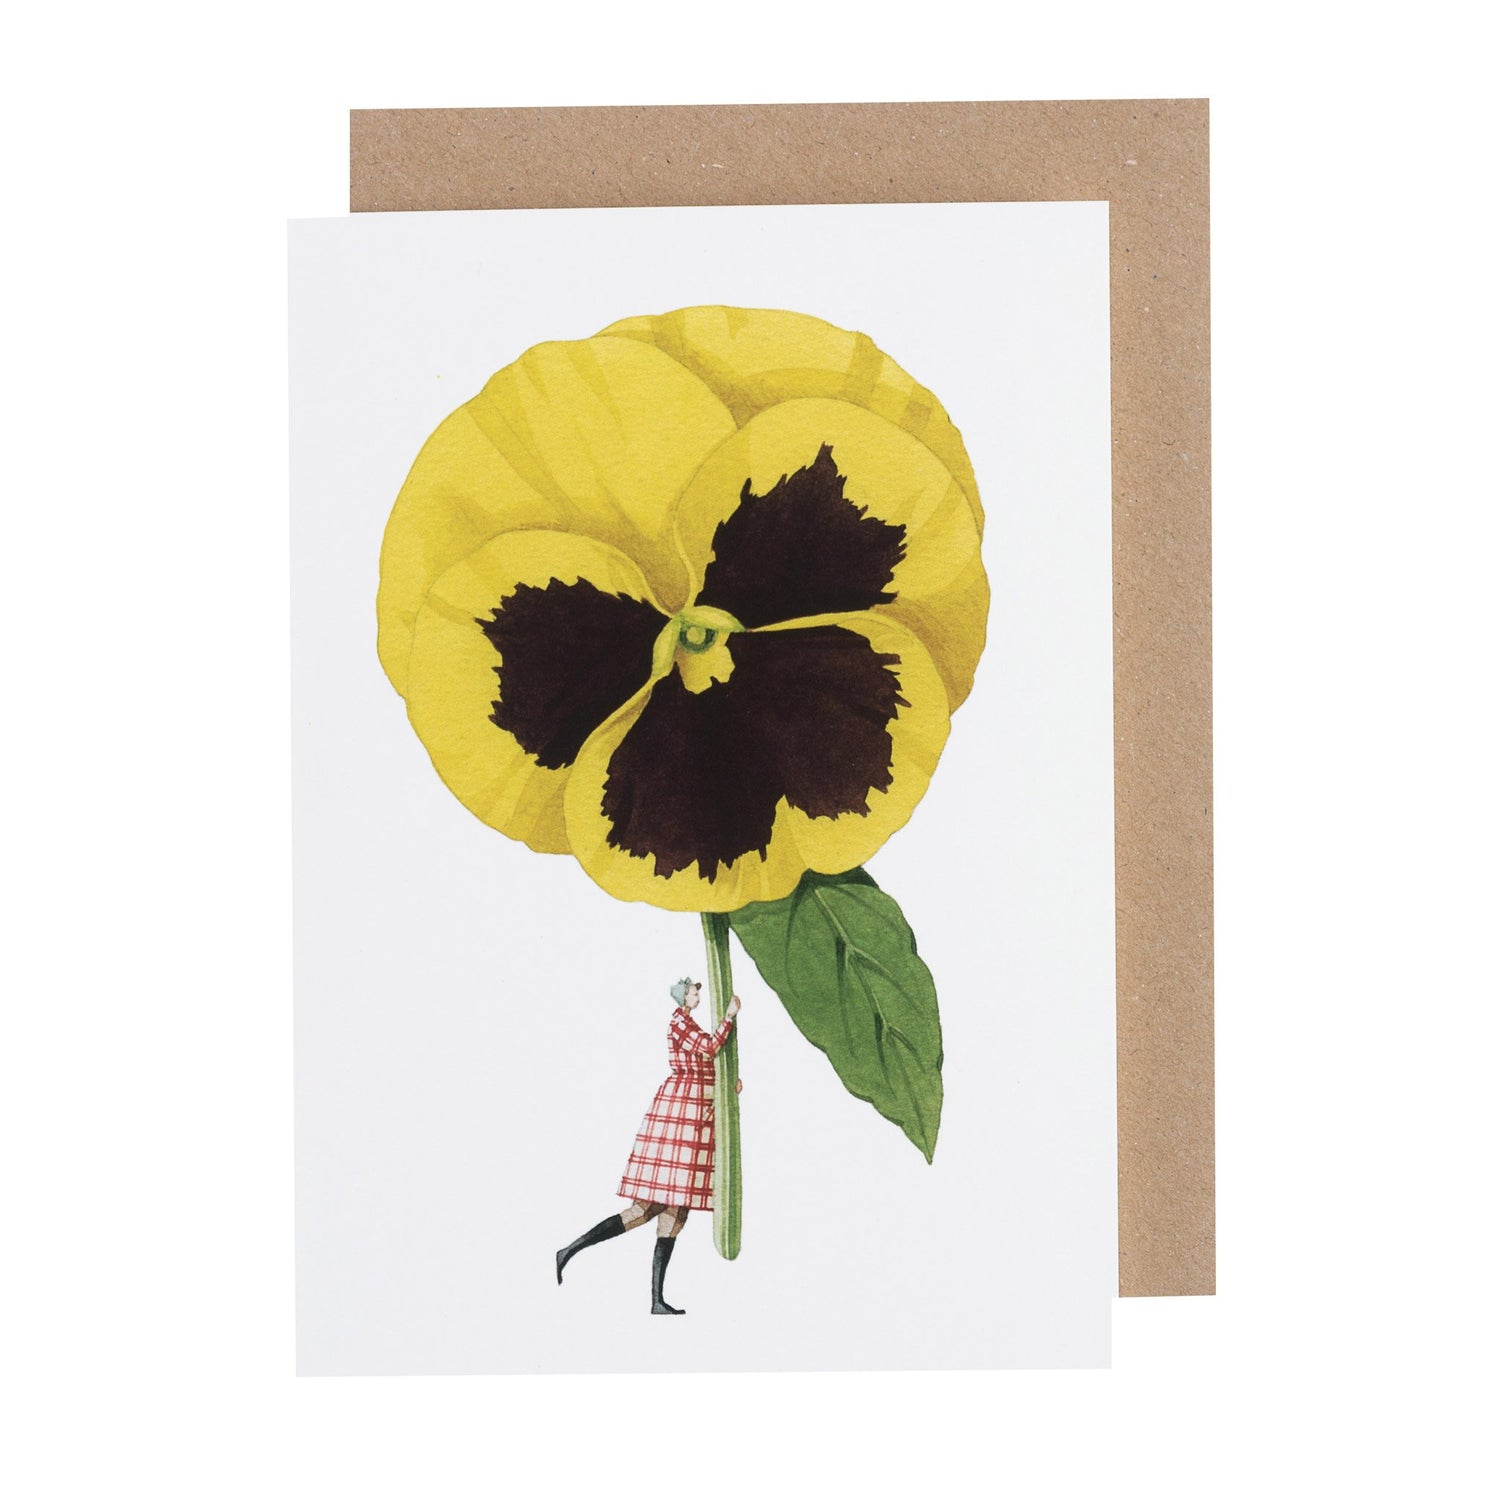 An artfully crafted Pansy greeting card featuring a beautiful yellow pansy flower on environmentally sustainable paper by Hester &amp; Cook.